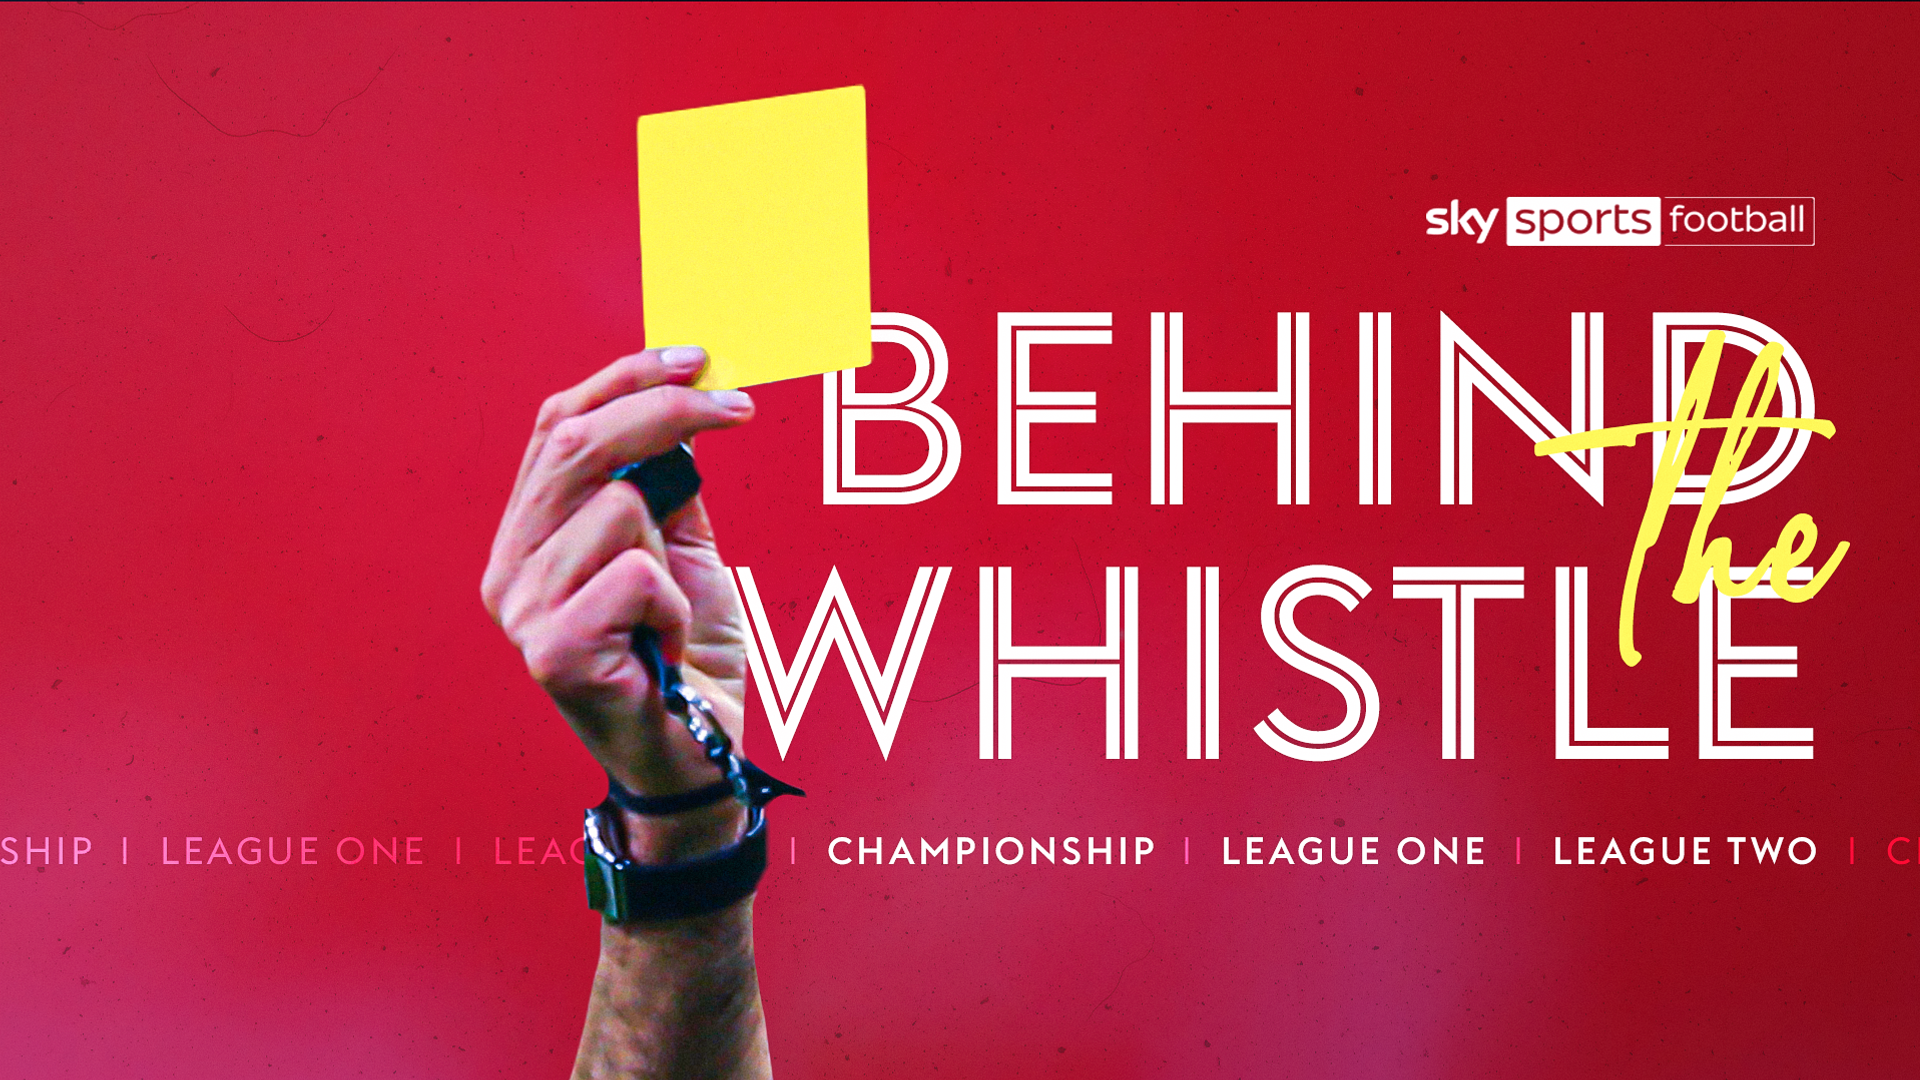 Behind the Whistle: Championship, League One and League Two decisions analysed